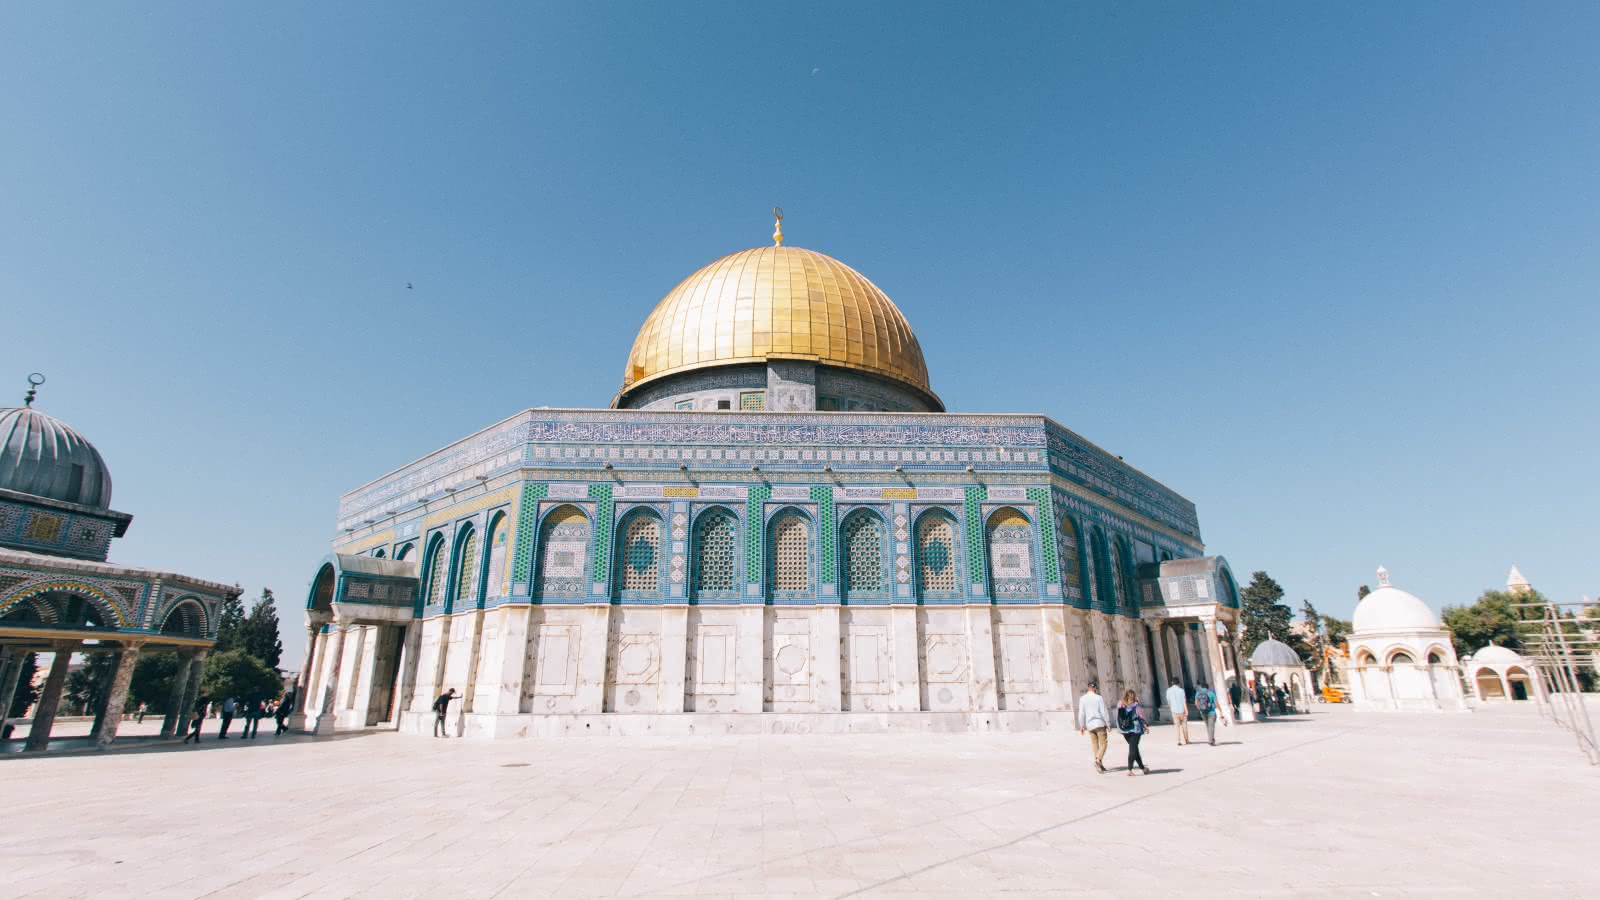 The Dome of the Rock in Jerusalem visited during the SANDEMANs Holy City Tour